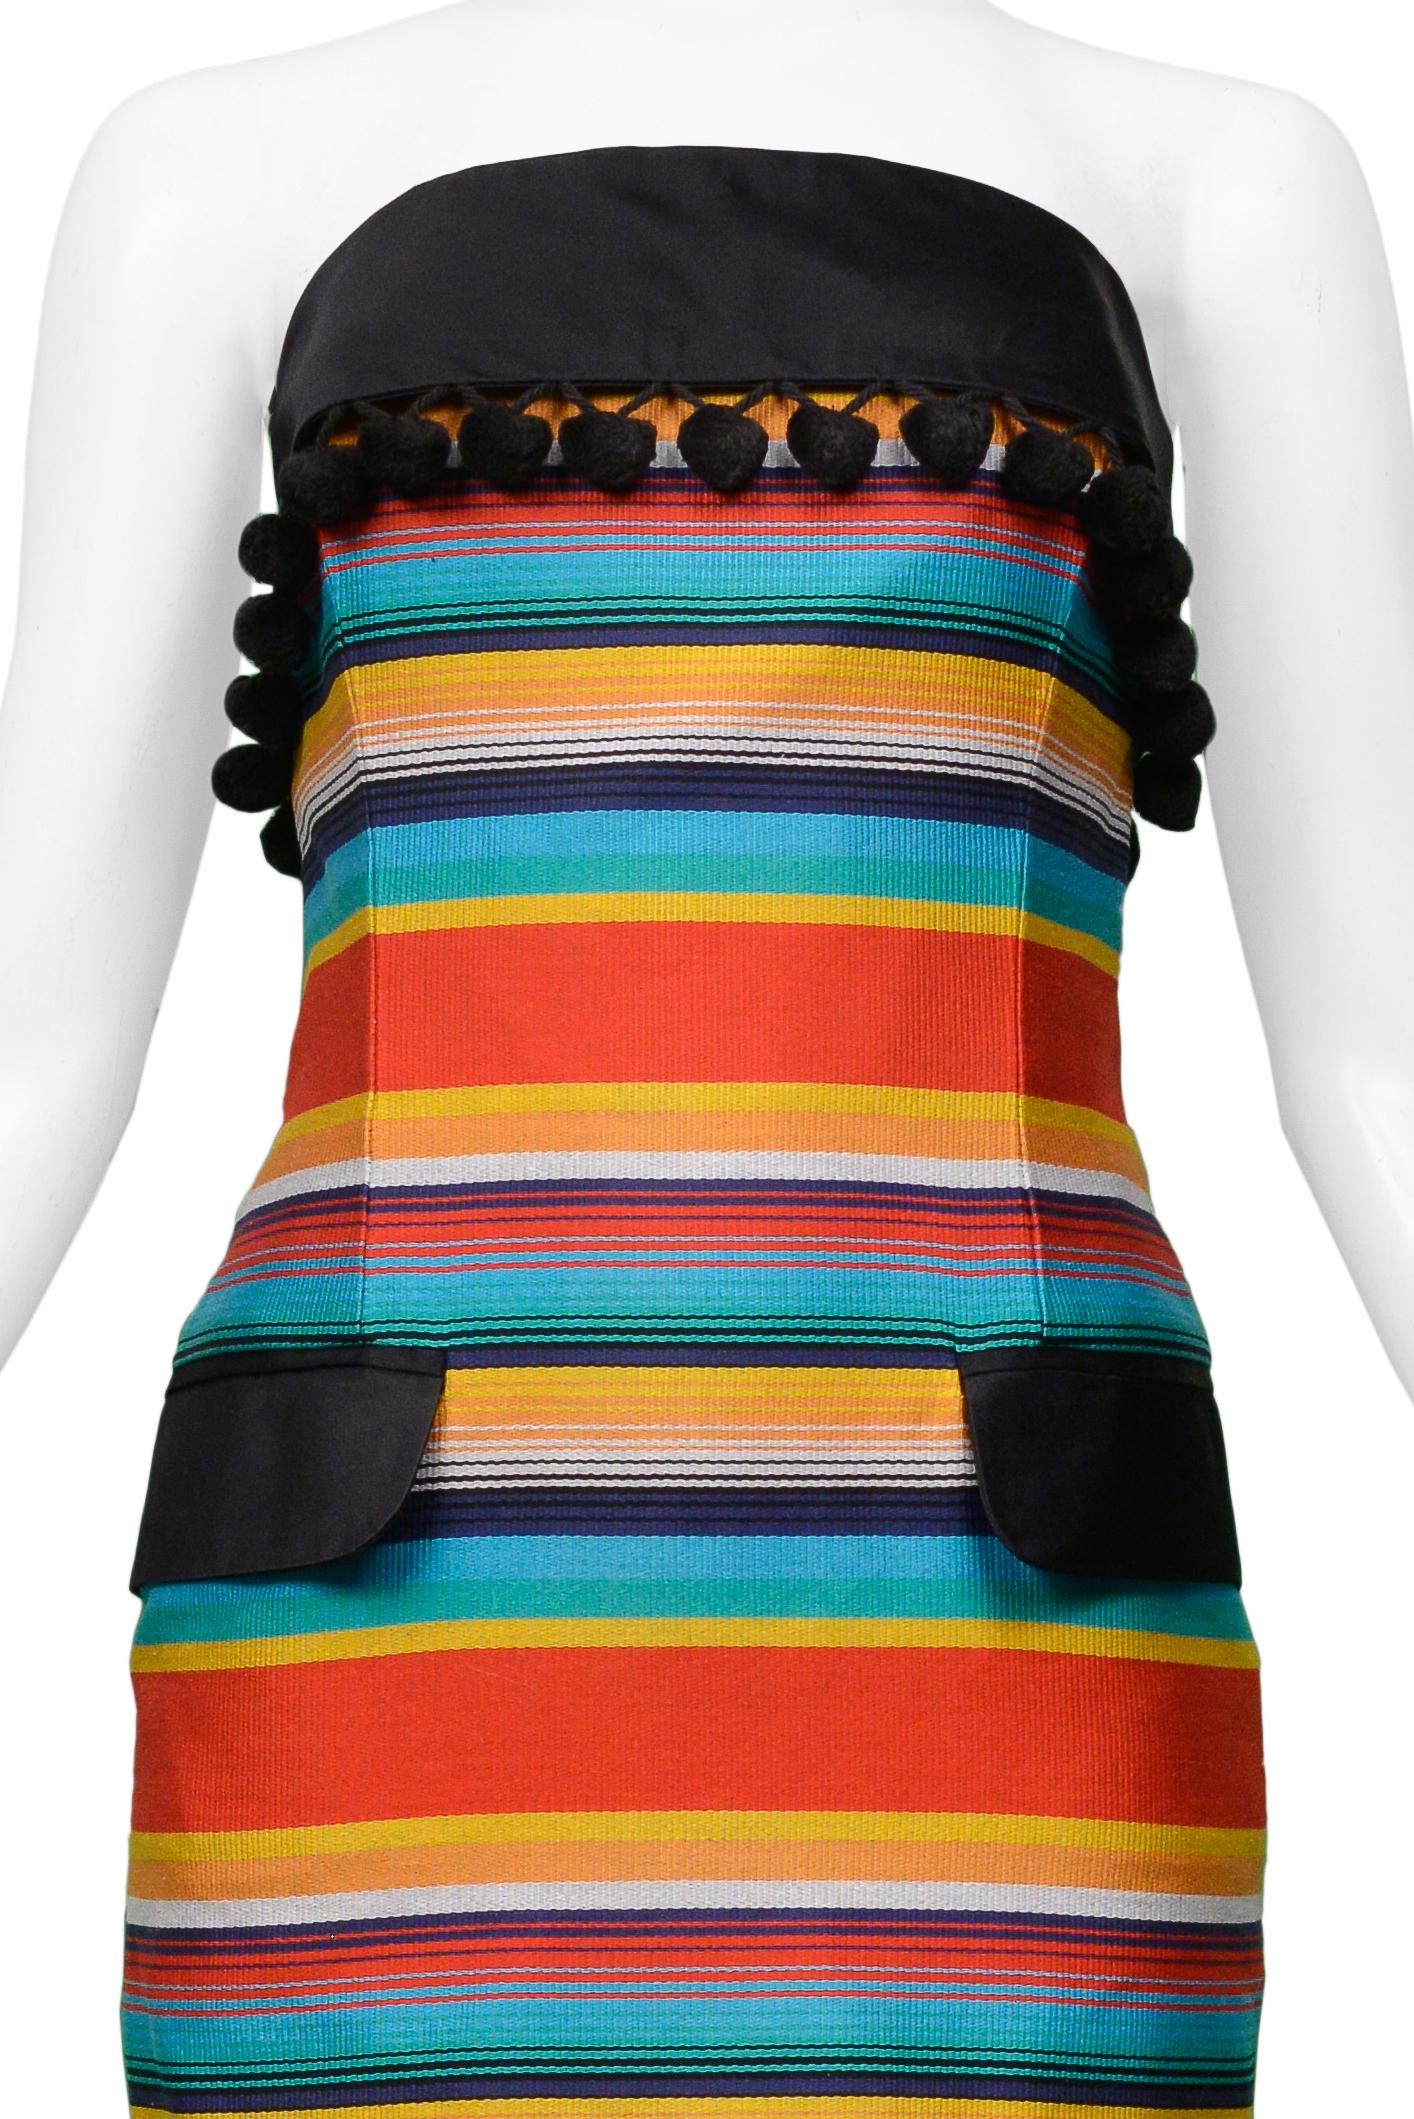 Perry Ellis By Marc Jacobs Striped Strapless Dress 1992 In Excellent Condition For Sale In Los Angeles, CA